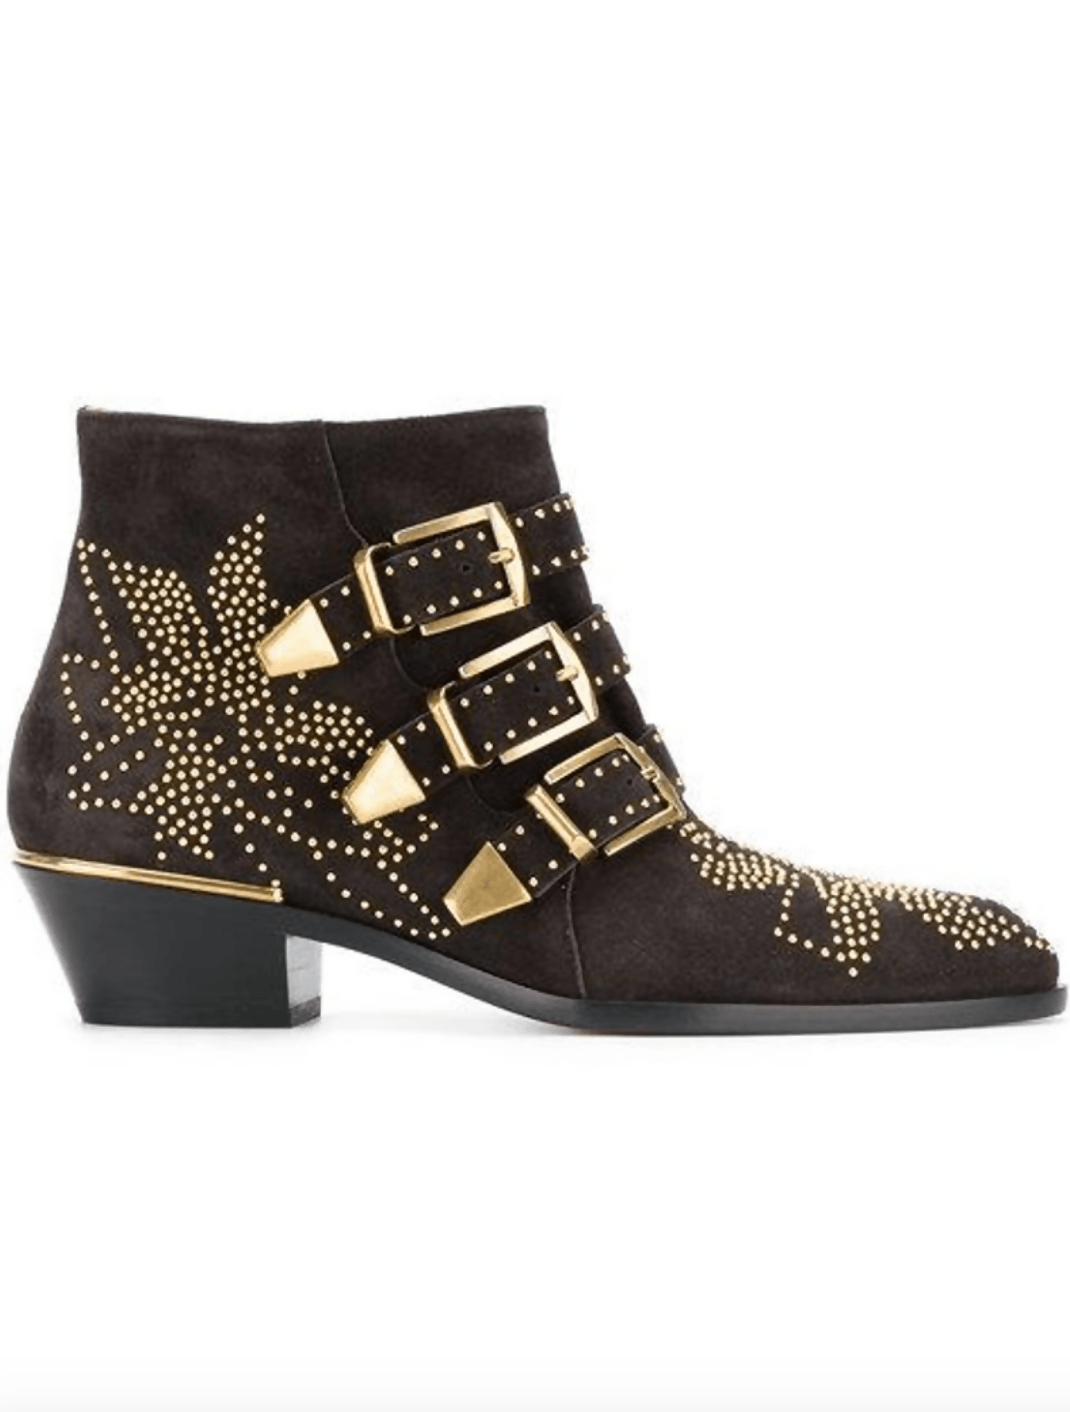 Suede Chocolate Susanna Studded Boots - Endless